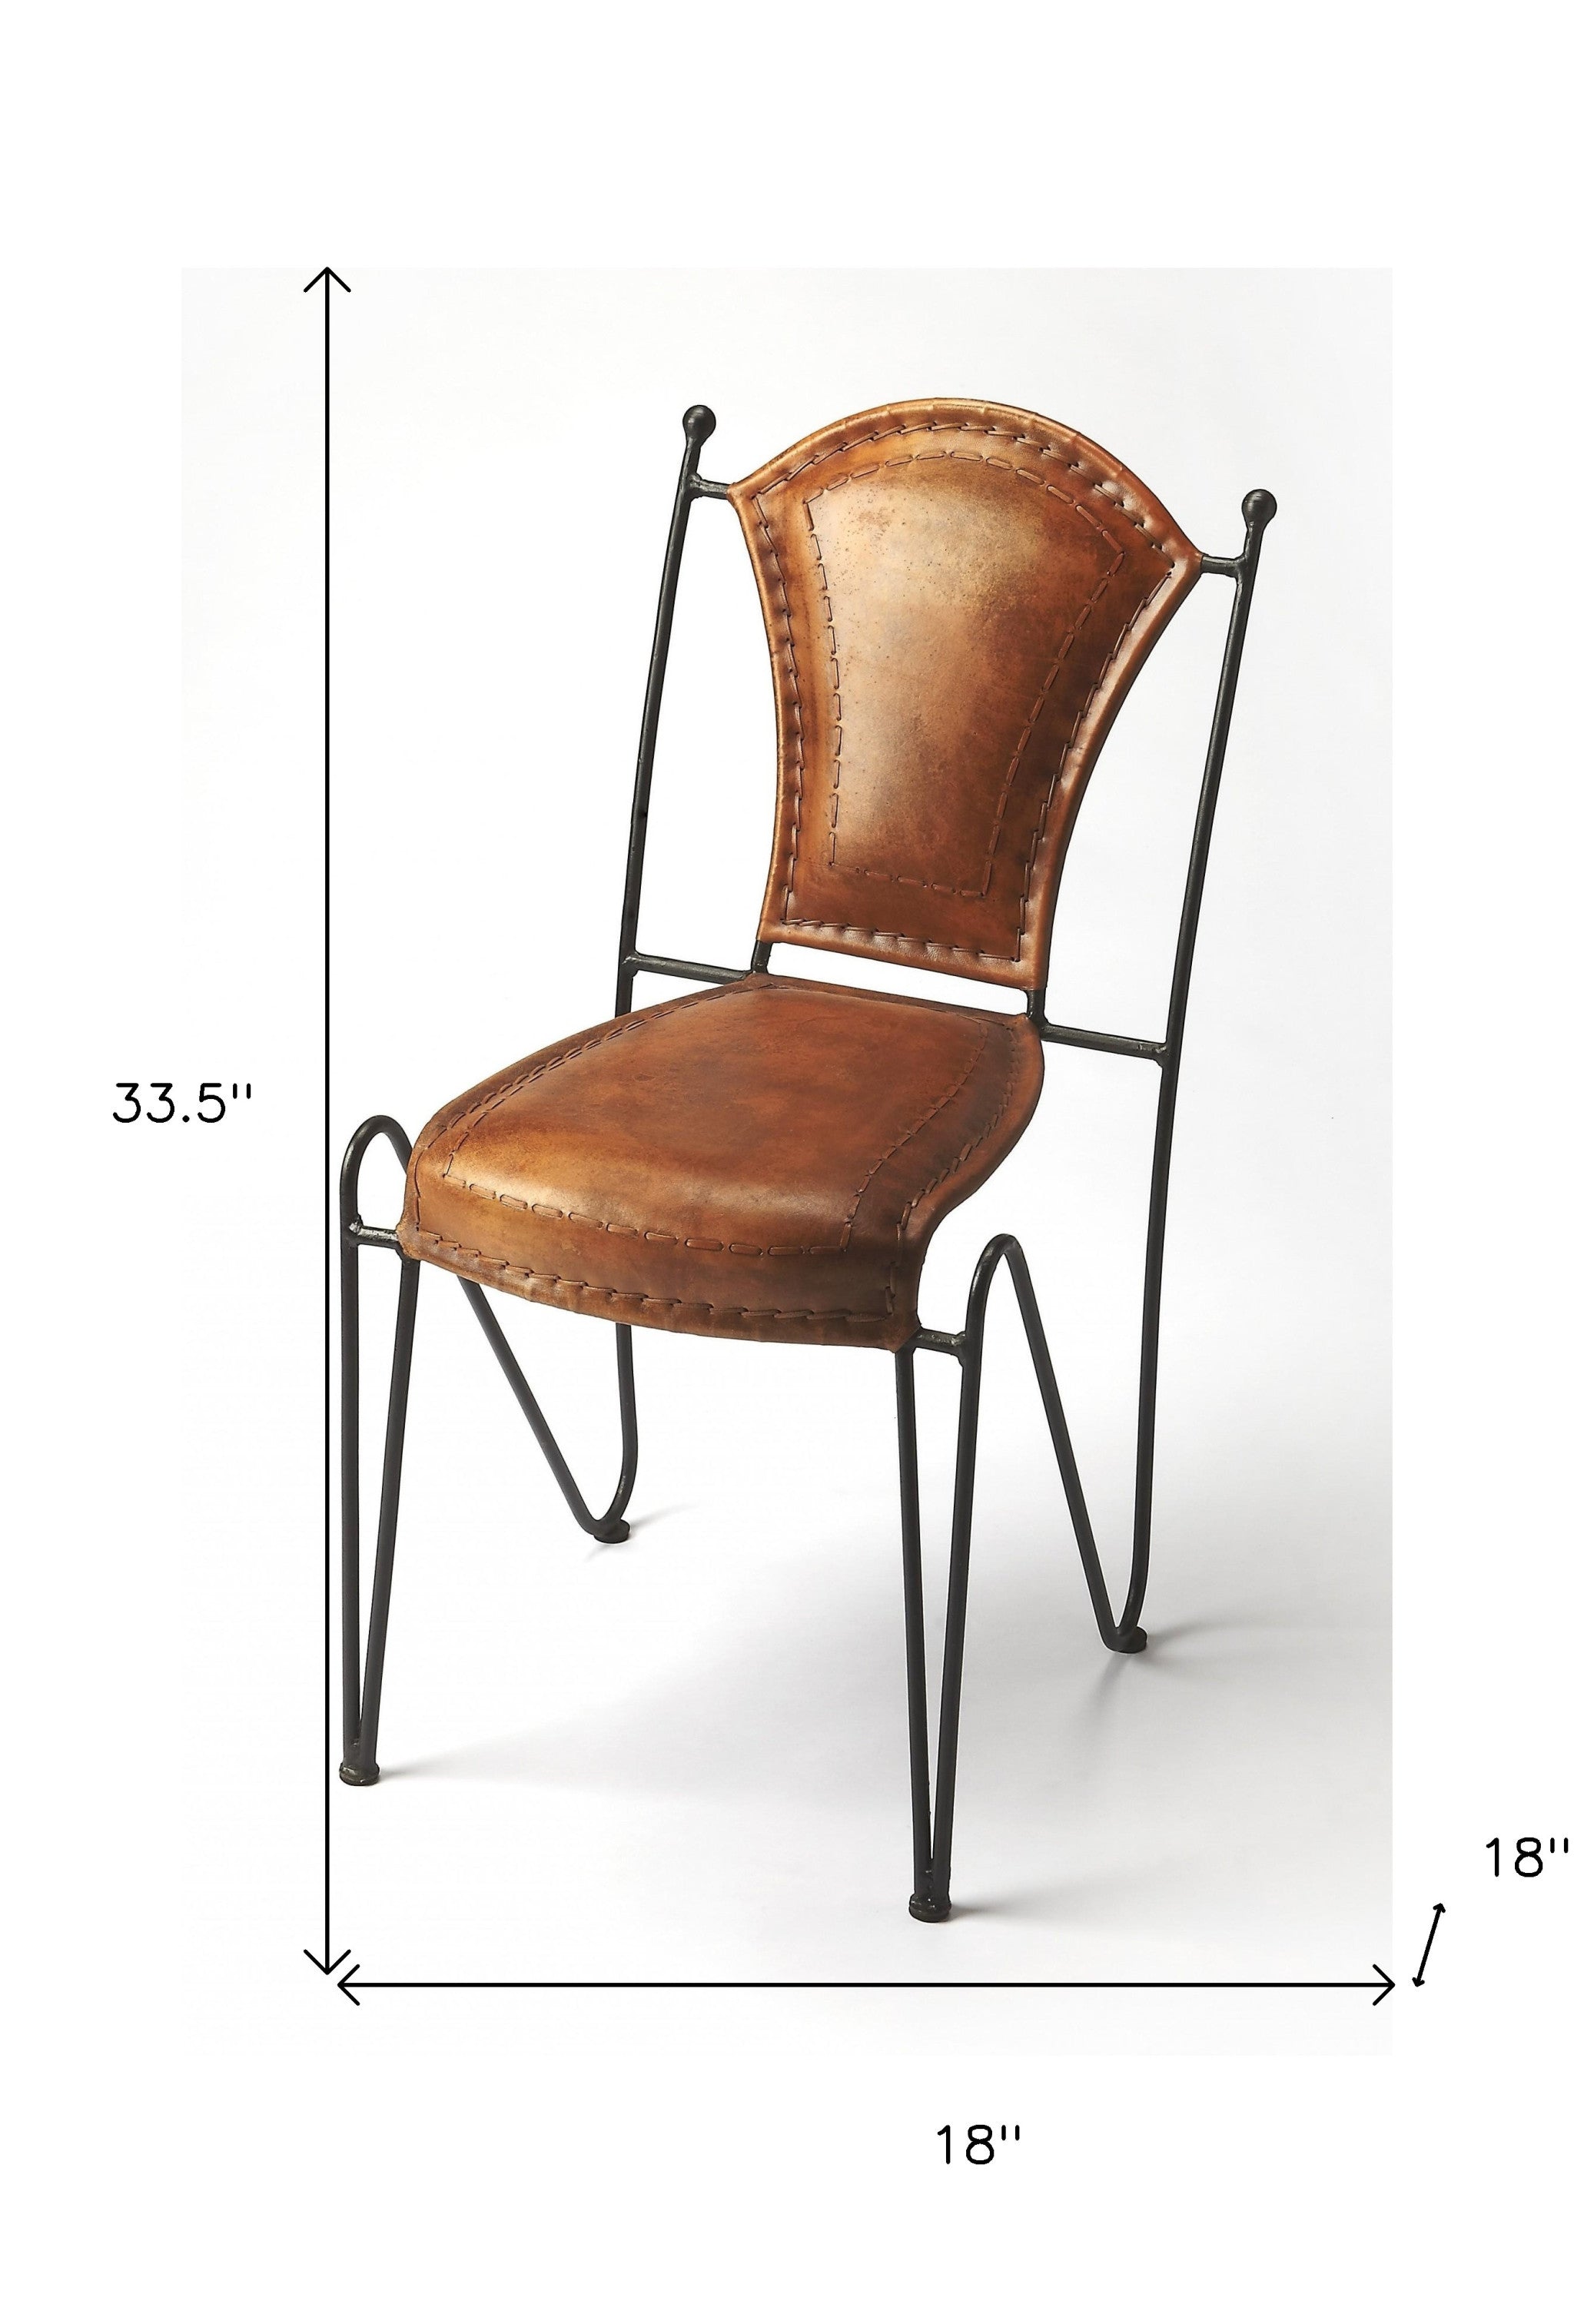 Modern Rustic Iron and Leather Side Chair